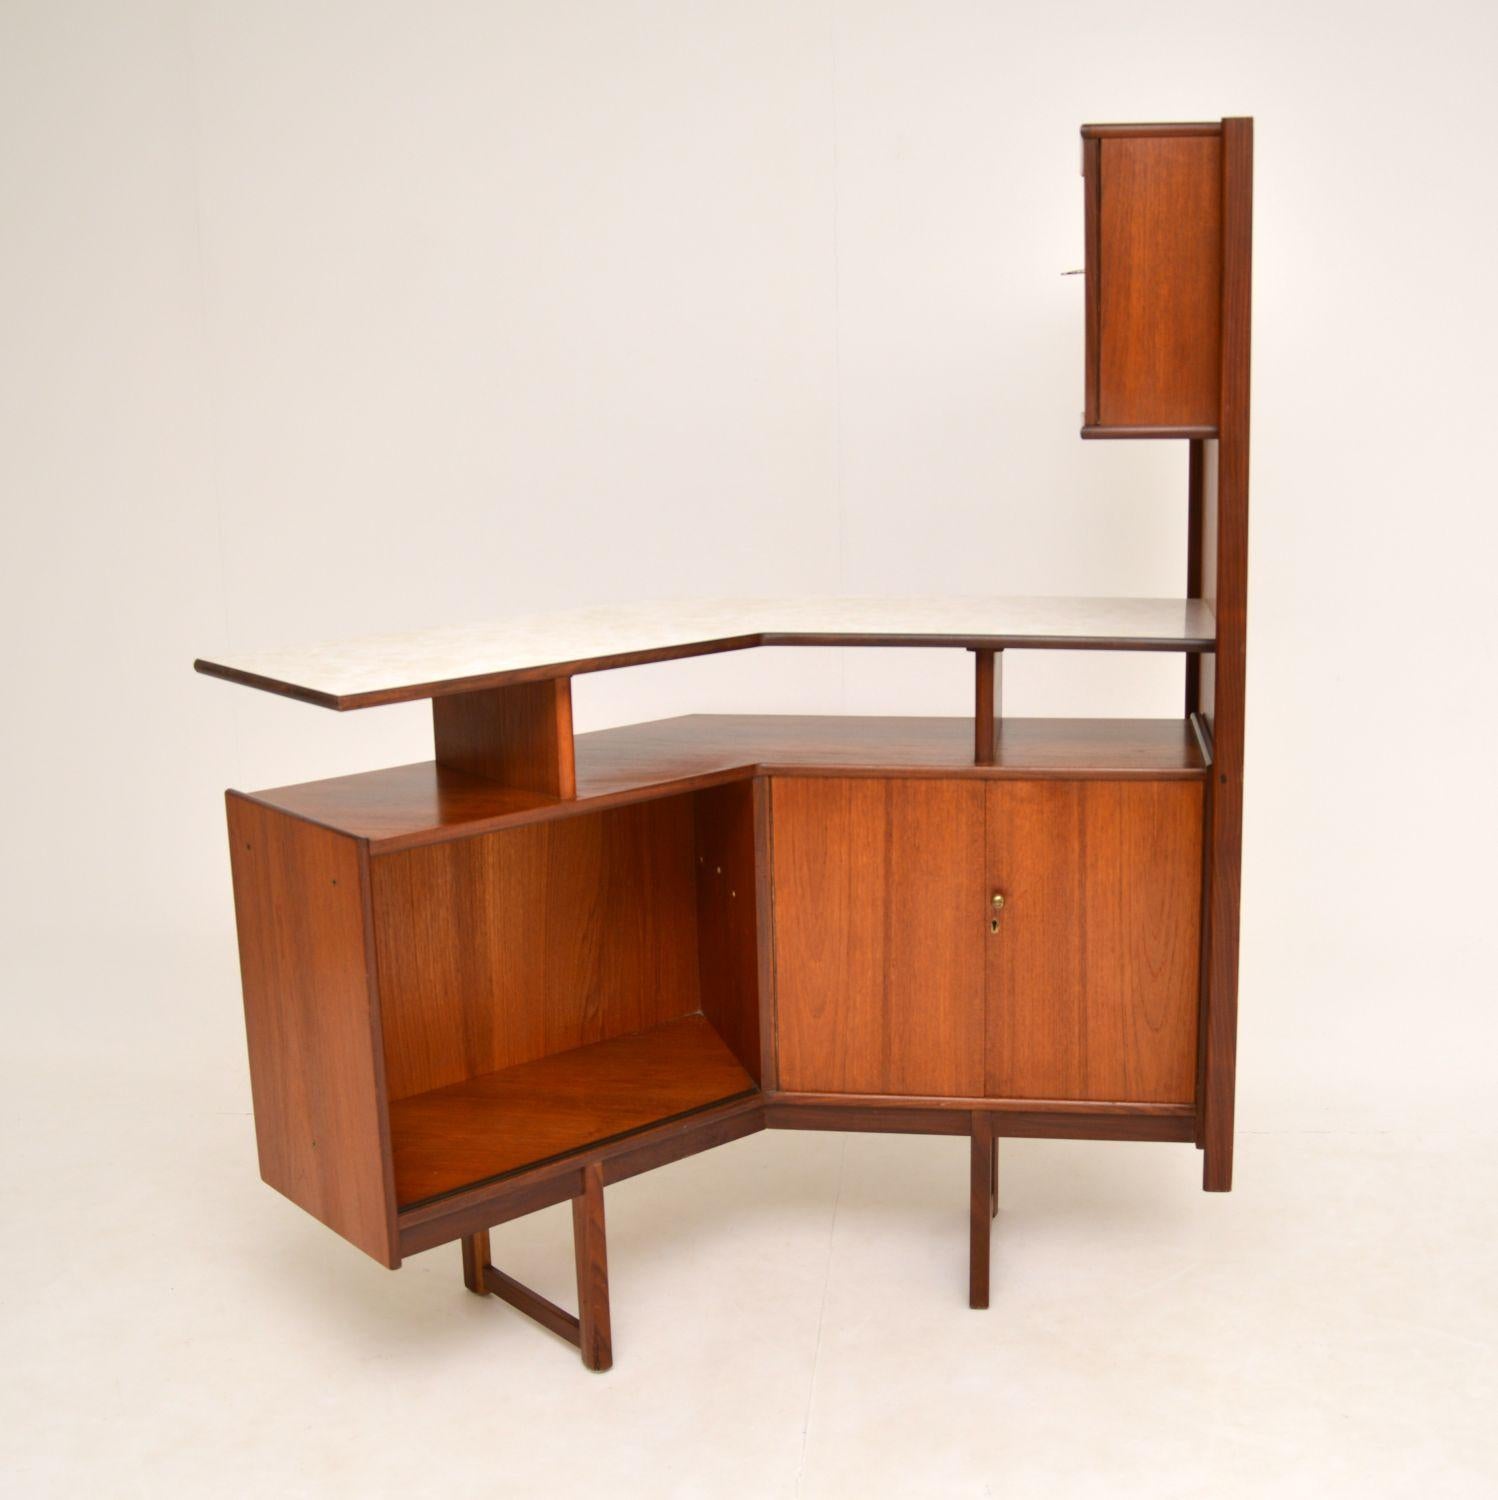 A fabulous and very well made vintage teak drinks bar, dating from the 1960s. This was made in England by Turnidge.

The end section can be removed and attached to the left or the right side, so this can be adjusted to suit your rooms needs.

It